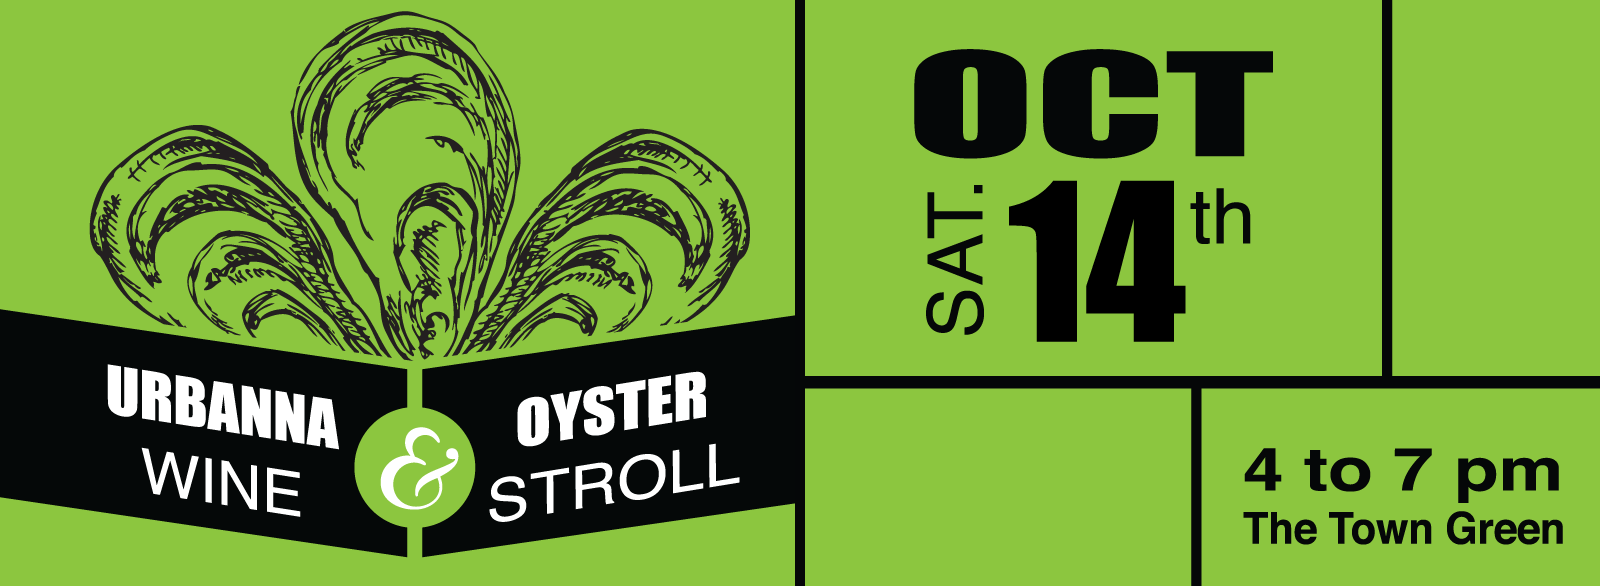 9158-oyster-stroll-banner.png